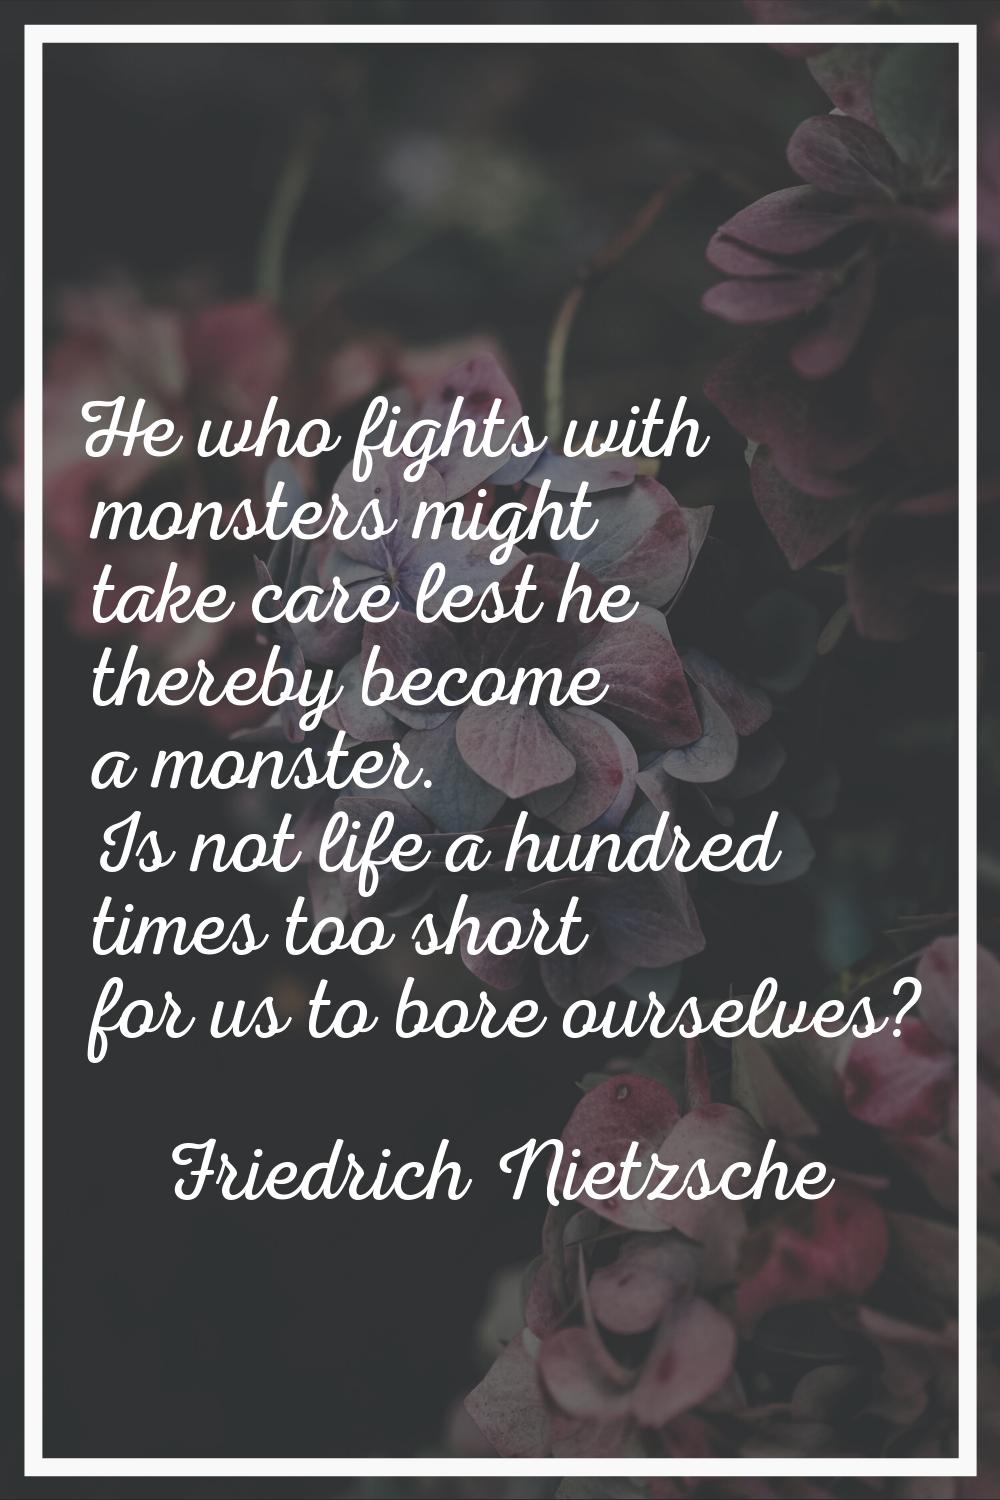 He who fights with monsters might take care lest he thereby become a monster. Is not life a hundred